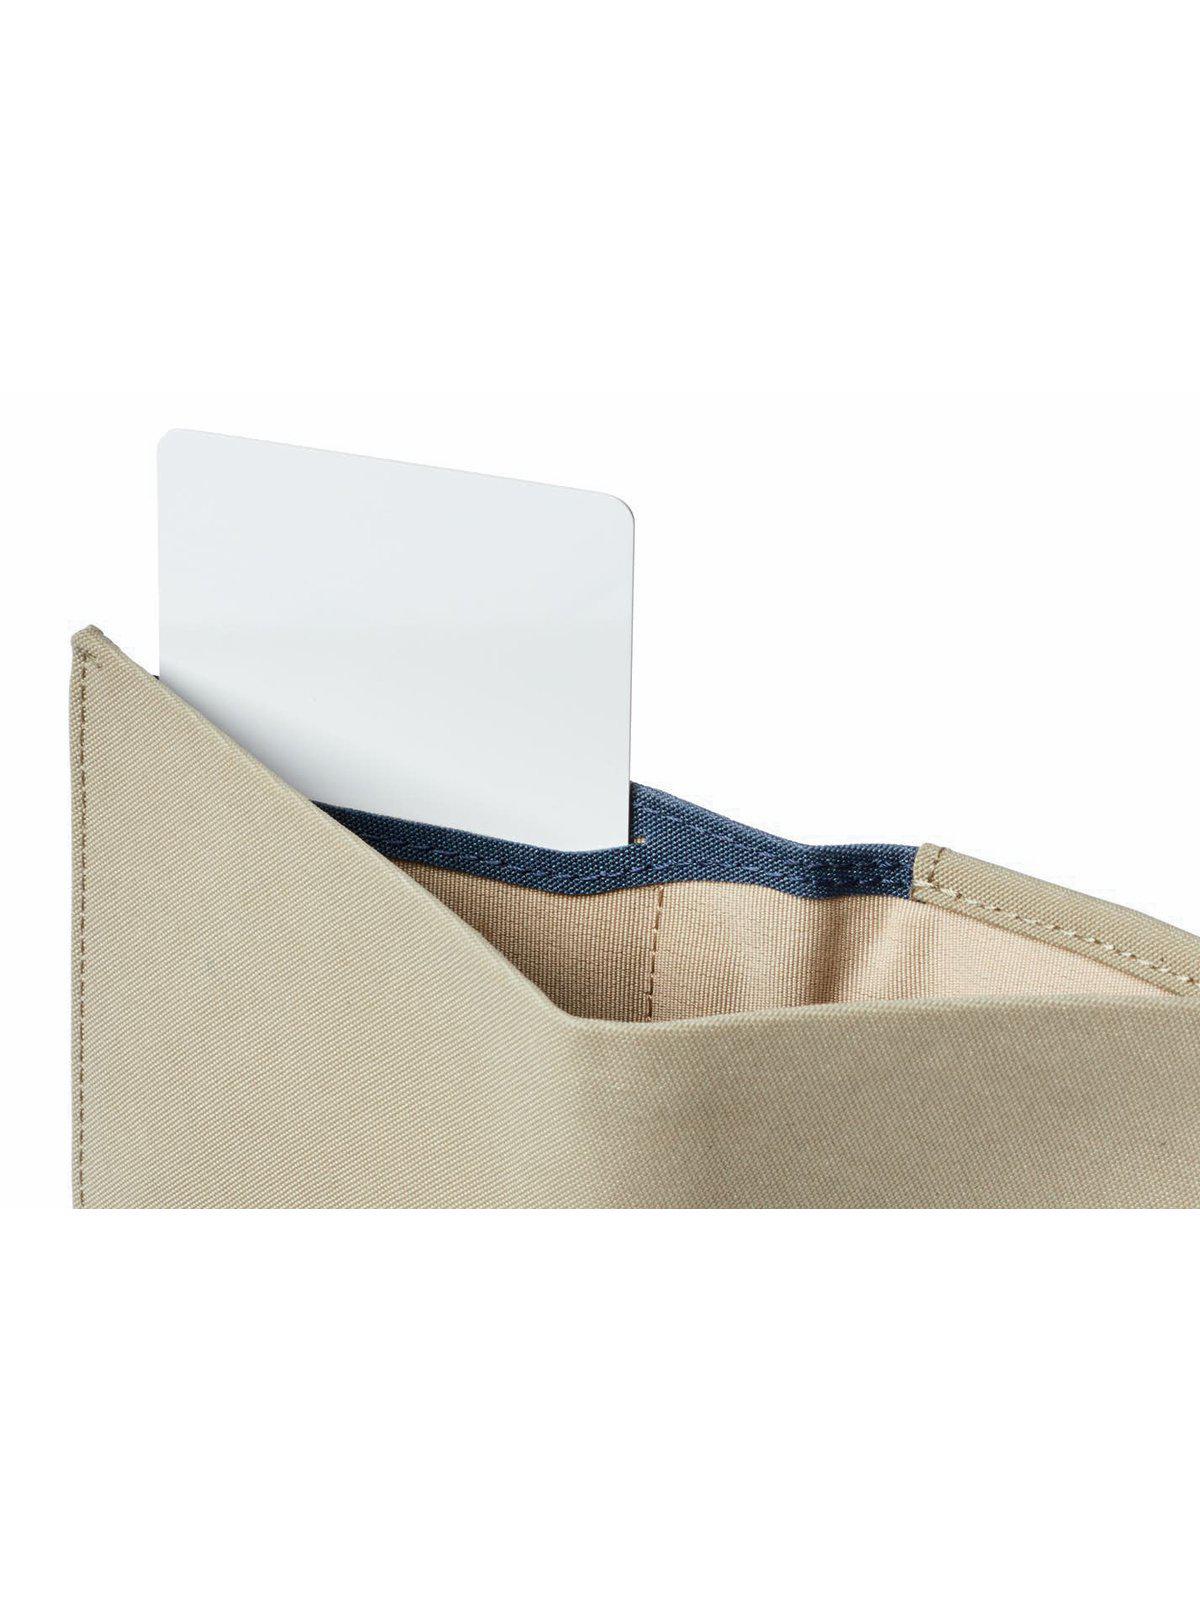 Bellroy Note Sleeve Wallet Woven Lichen RFID (Leather-Free)